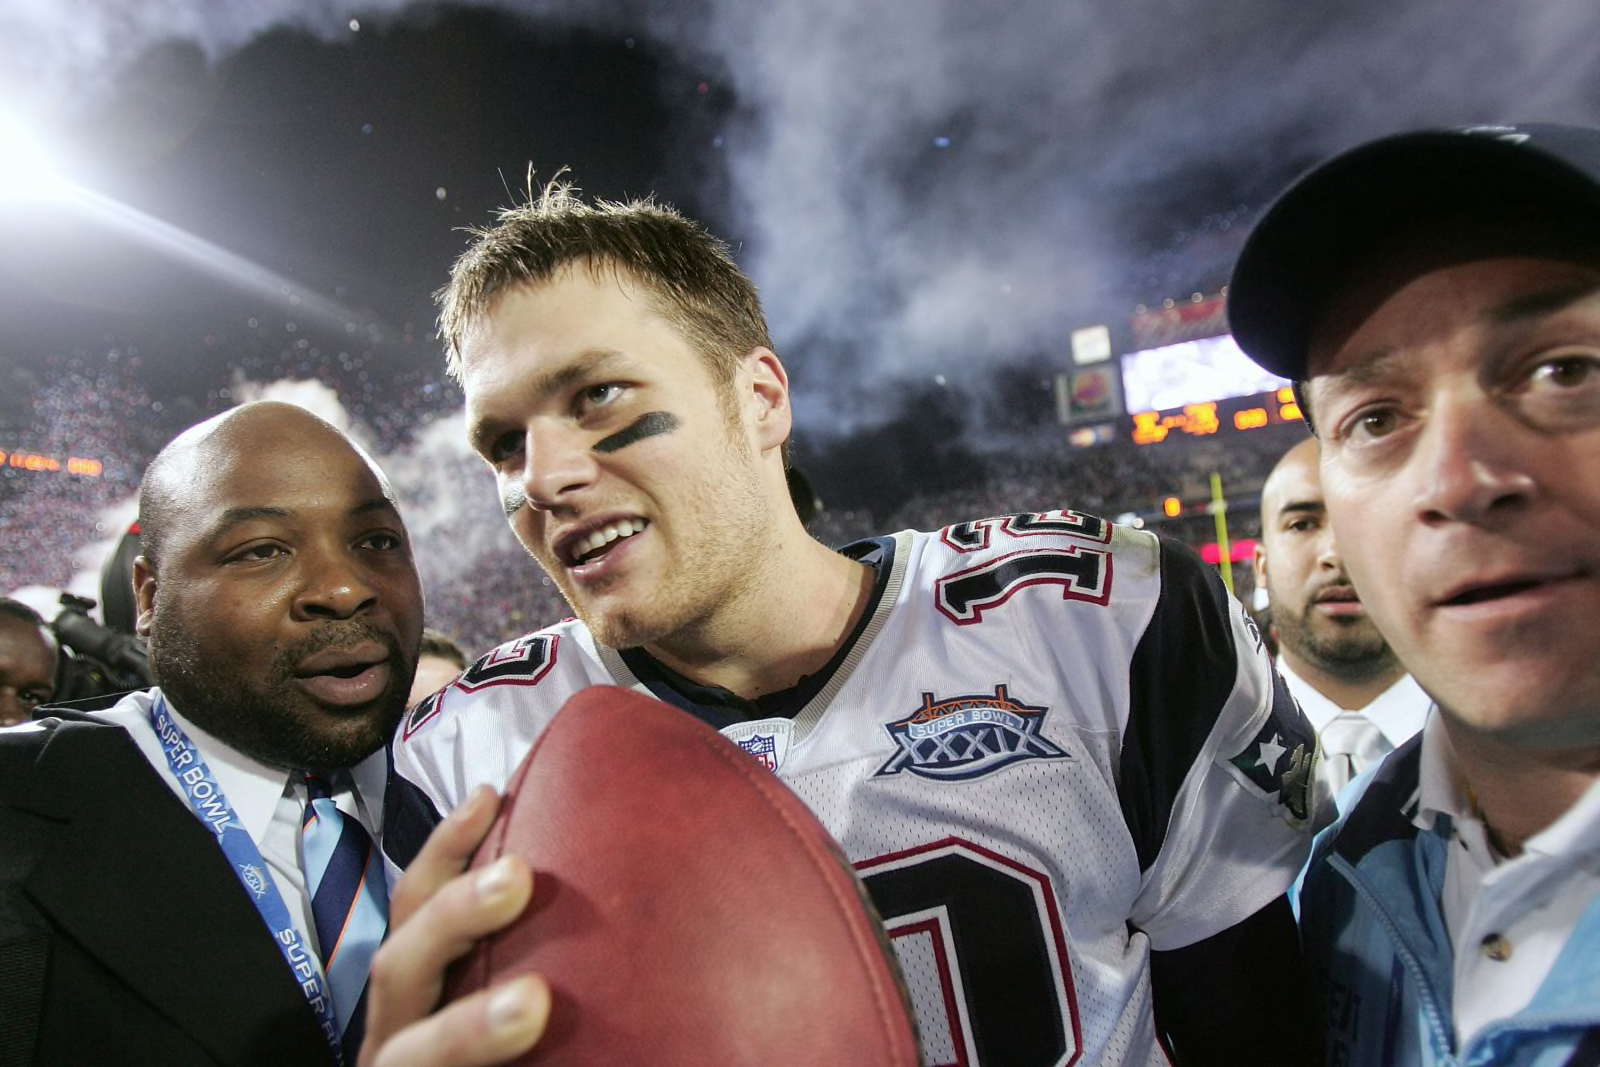 Gallery: Tom Brady playing in 2005 Super Bowl in Jacksonville